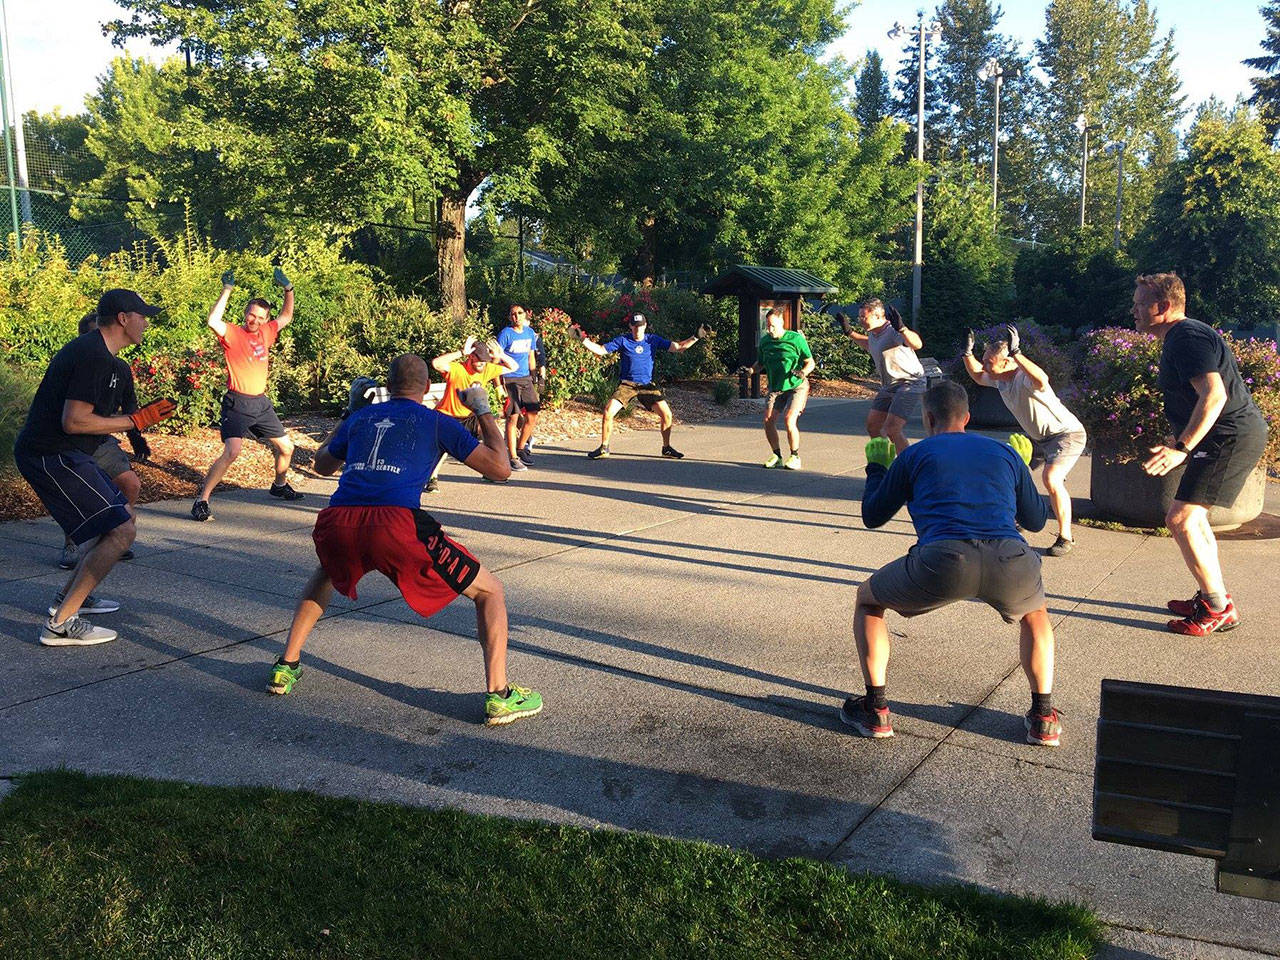 F3 members perform “Leprechaun in the Woods”, also known as squat jumping jack, as they wait for another group to return from a lap around the parking lot. Photo Courtesy of Brian “Dilfer” Gawthrop